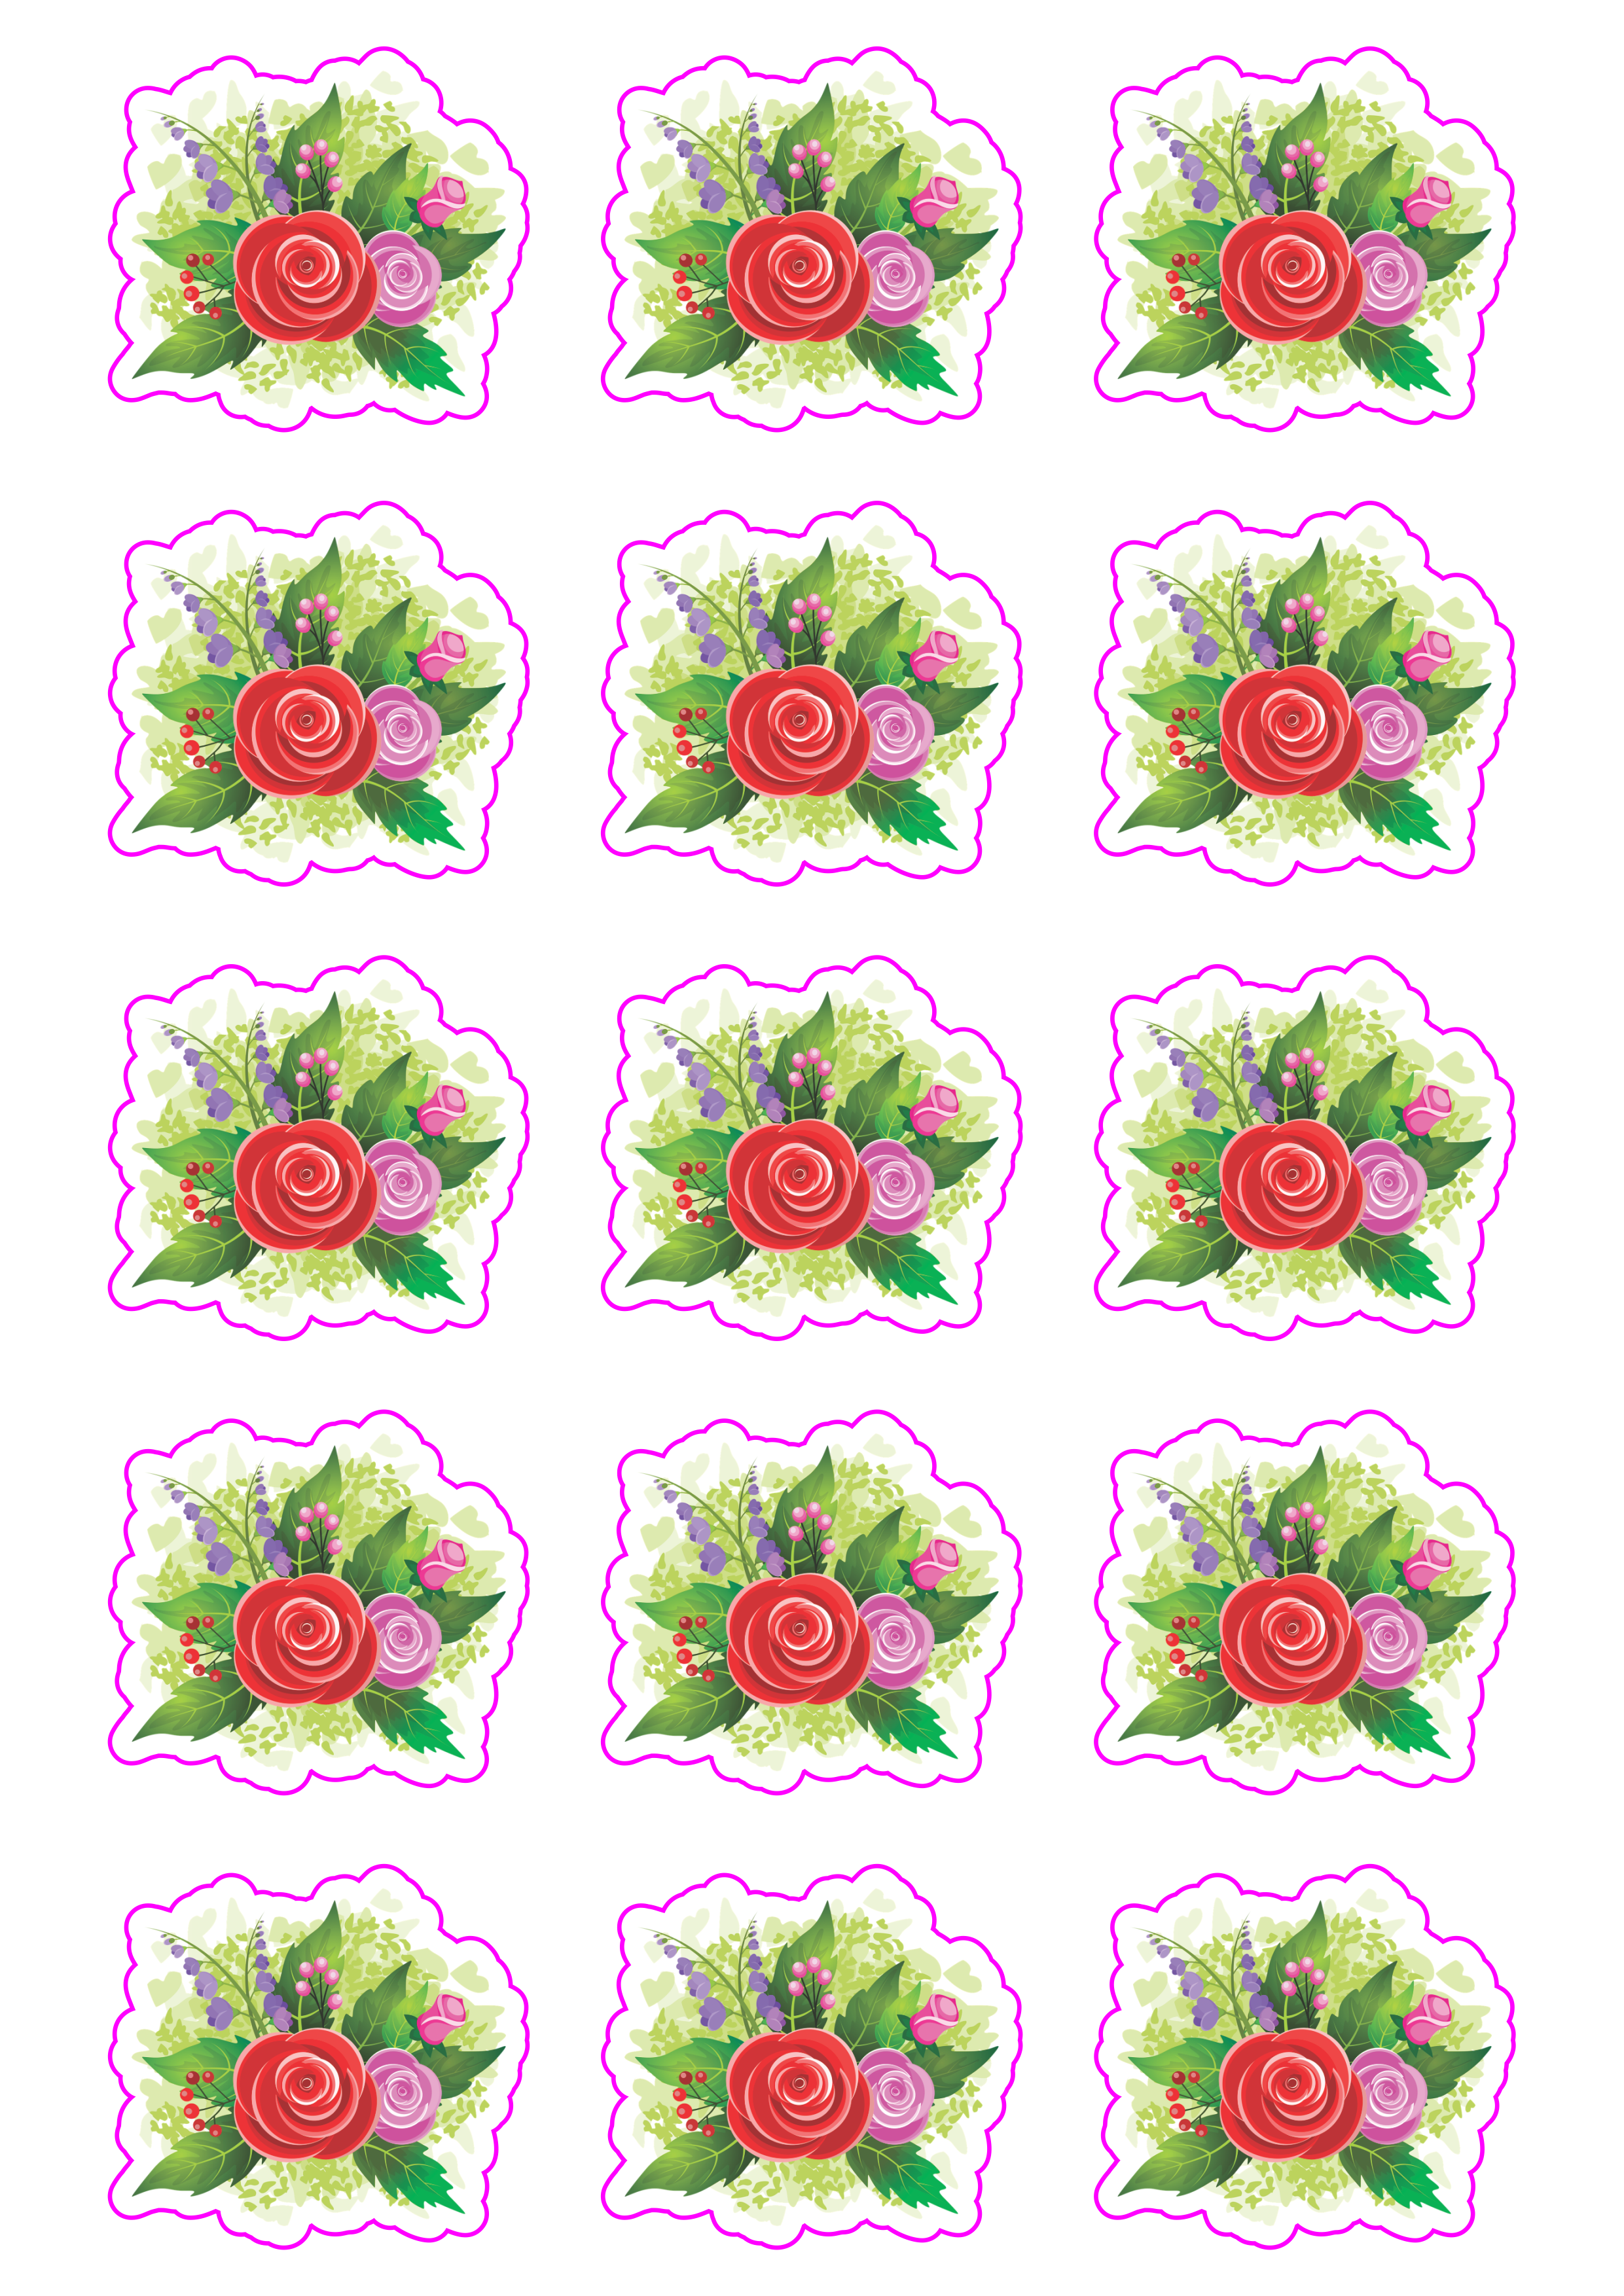 stickers-flores1